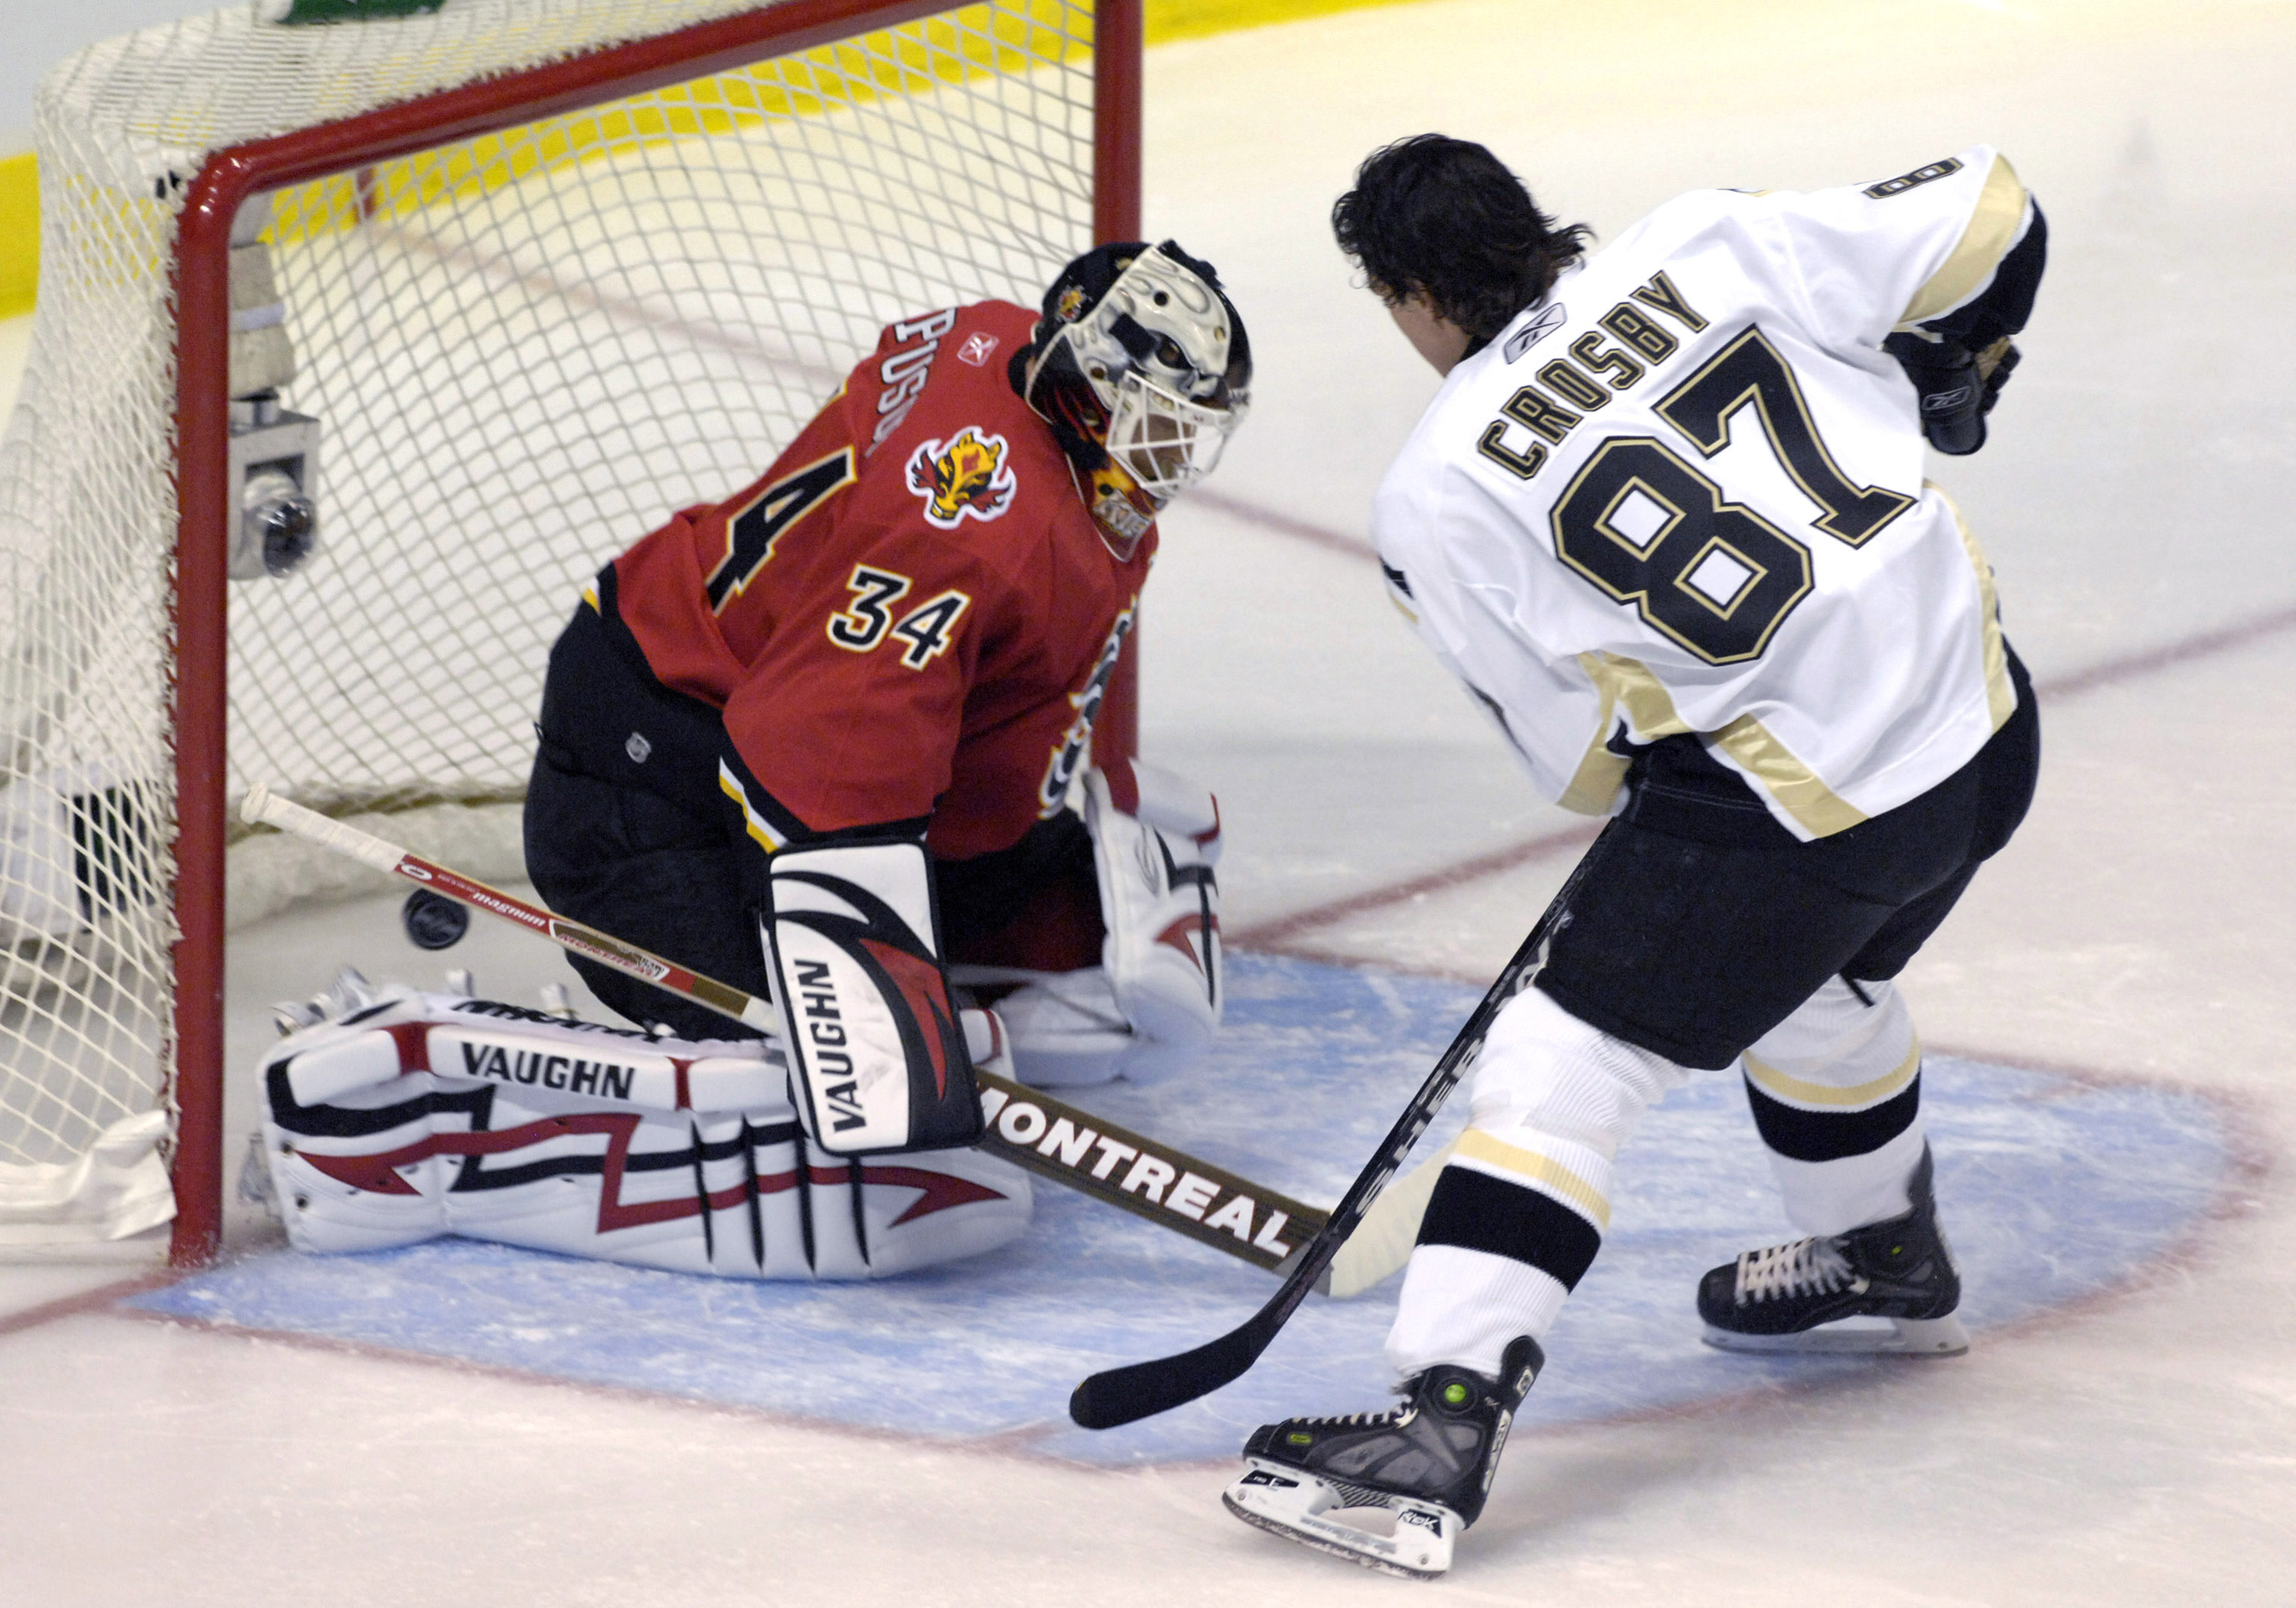 Pittsburgh Penguins forward Sidney Crosby scores a goal on Calgary Flames goalie Miikka Kiprusoff during the SuperSkills competition during the 2007 NHL All-Star game at the American Airlines Center in Dallas on January 23, 2007.  (Photo by A. Messerschmi